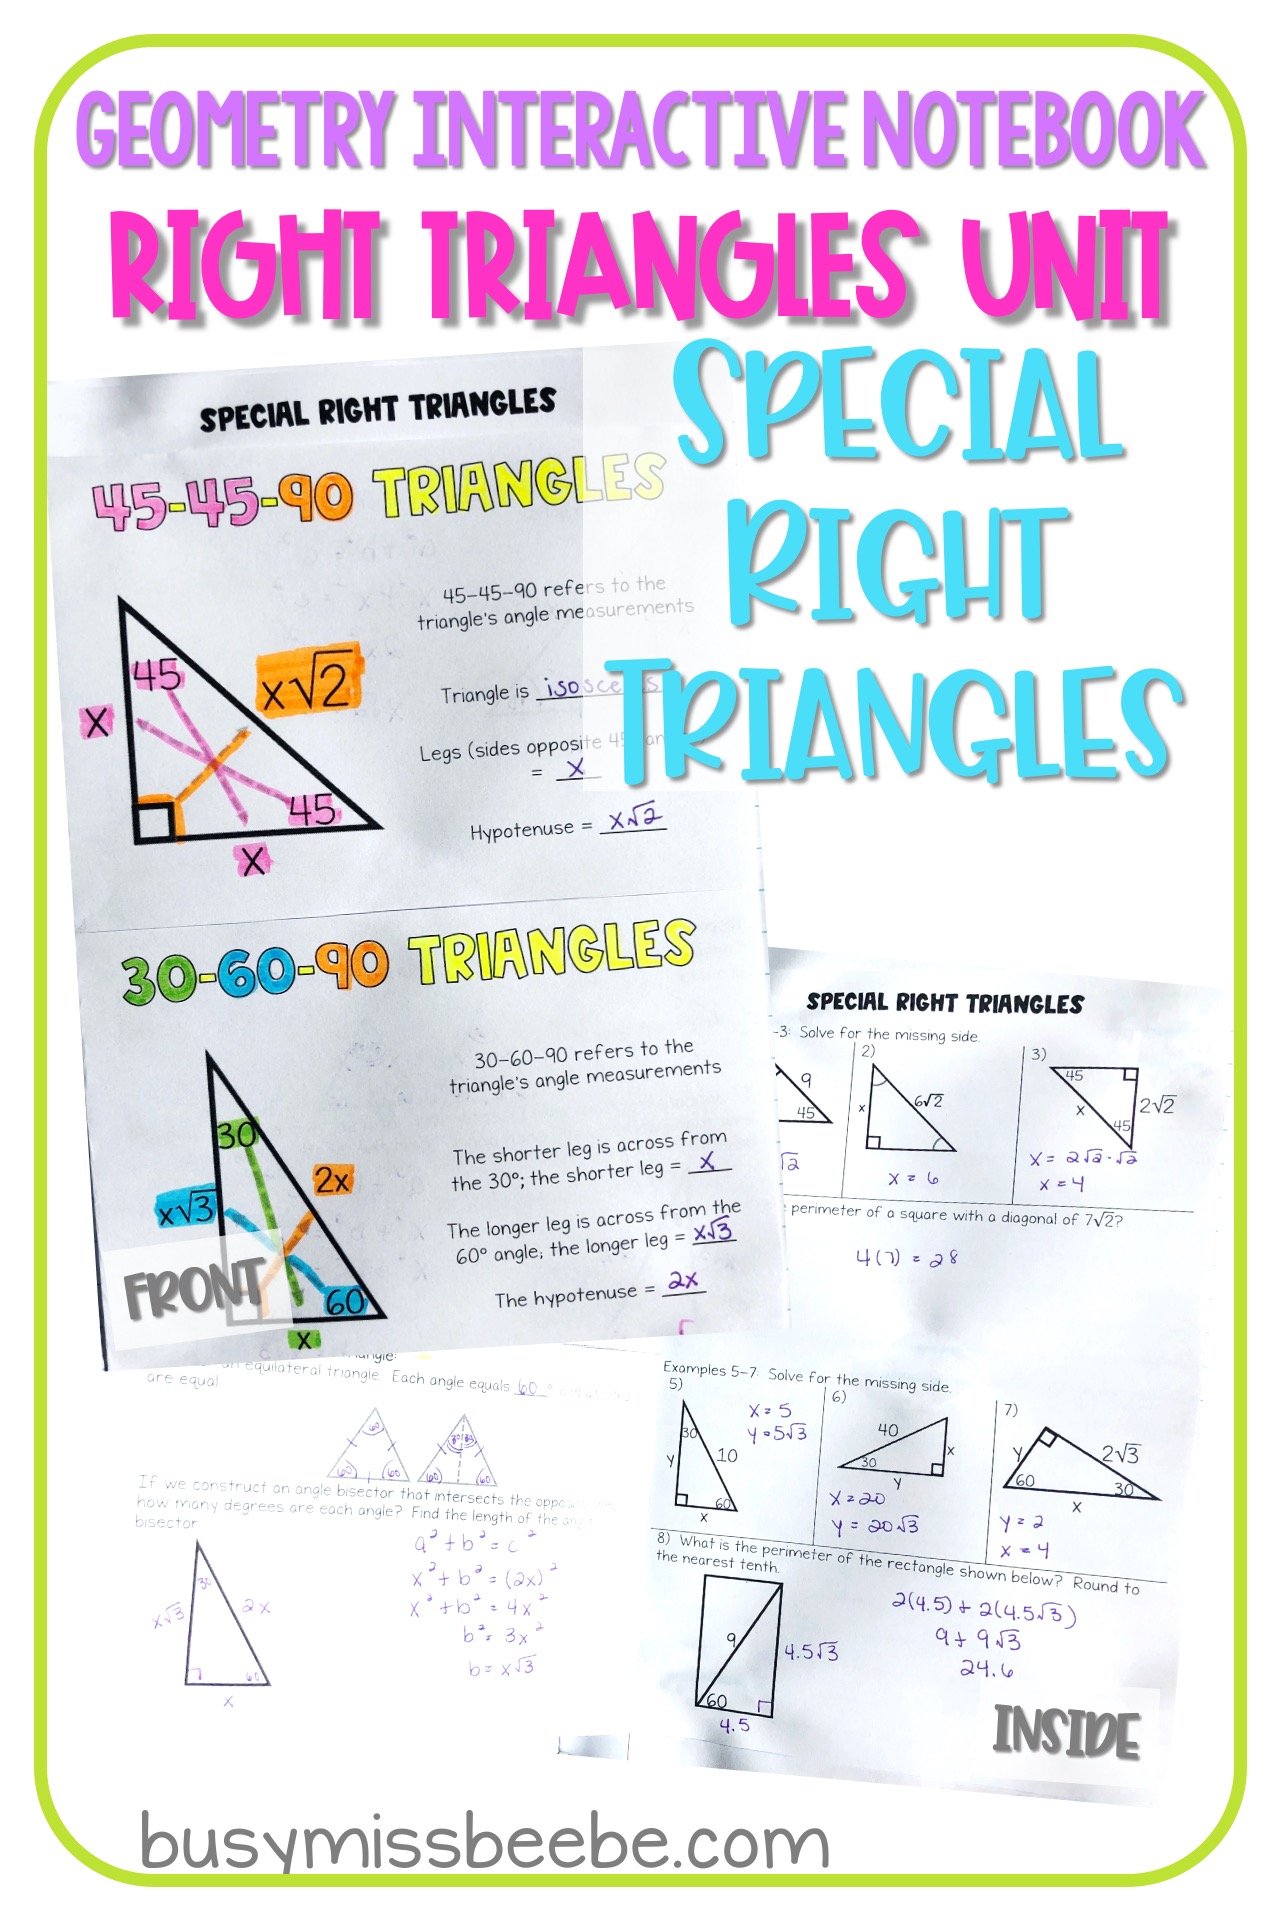 Geometry Interactive Notebook Right Triangles Busy Miss Beebe